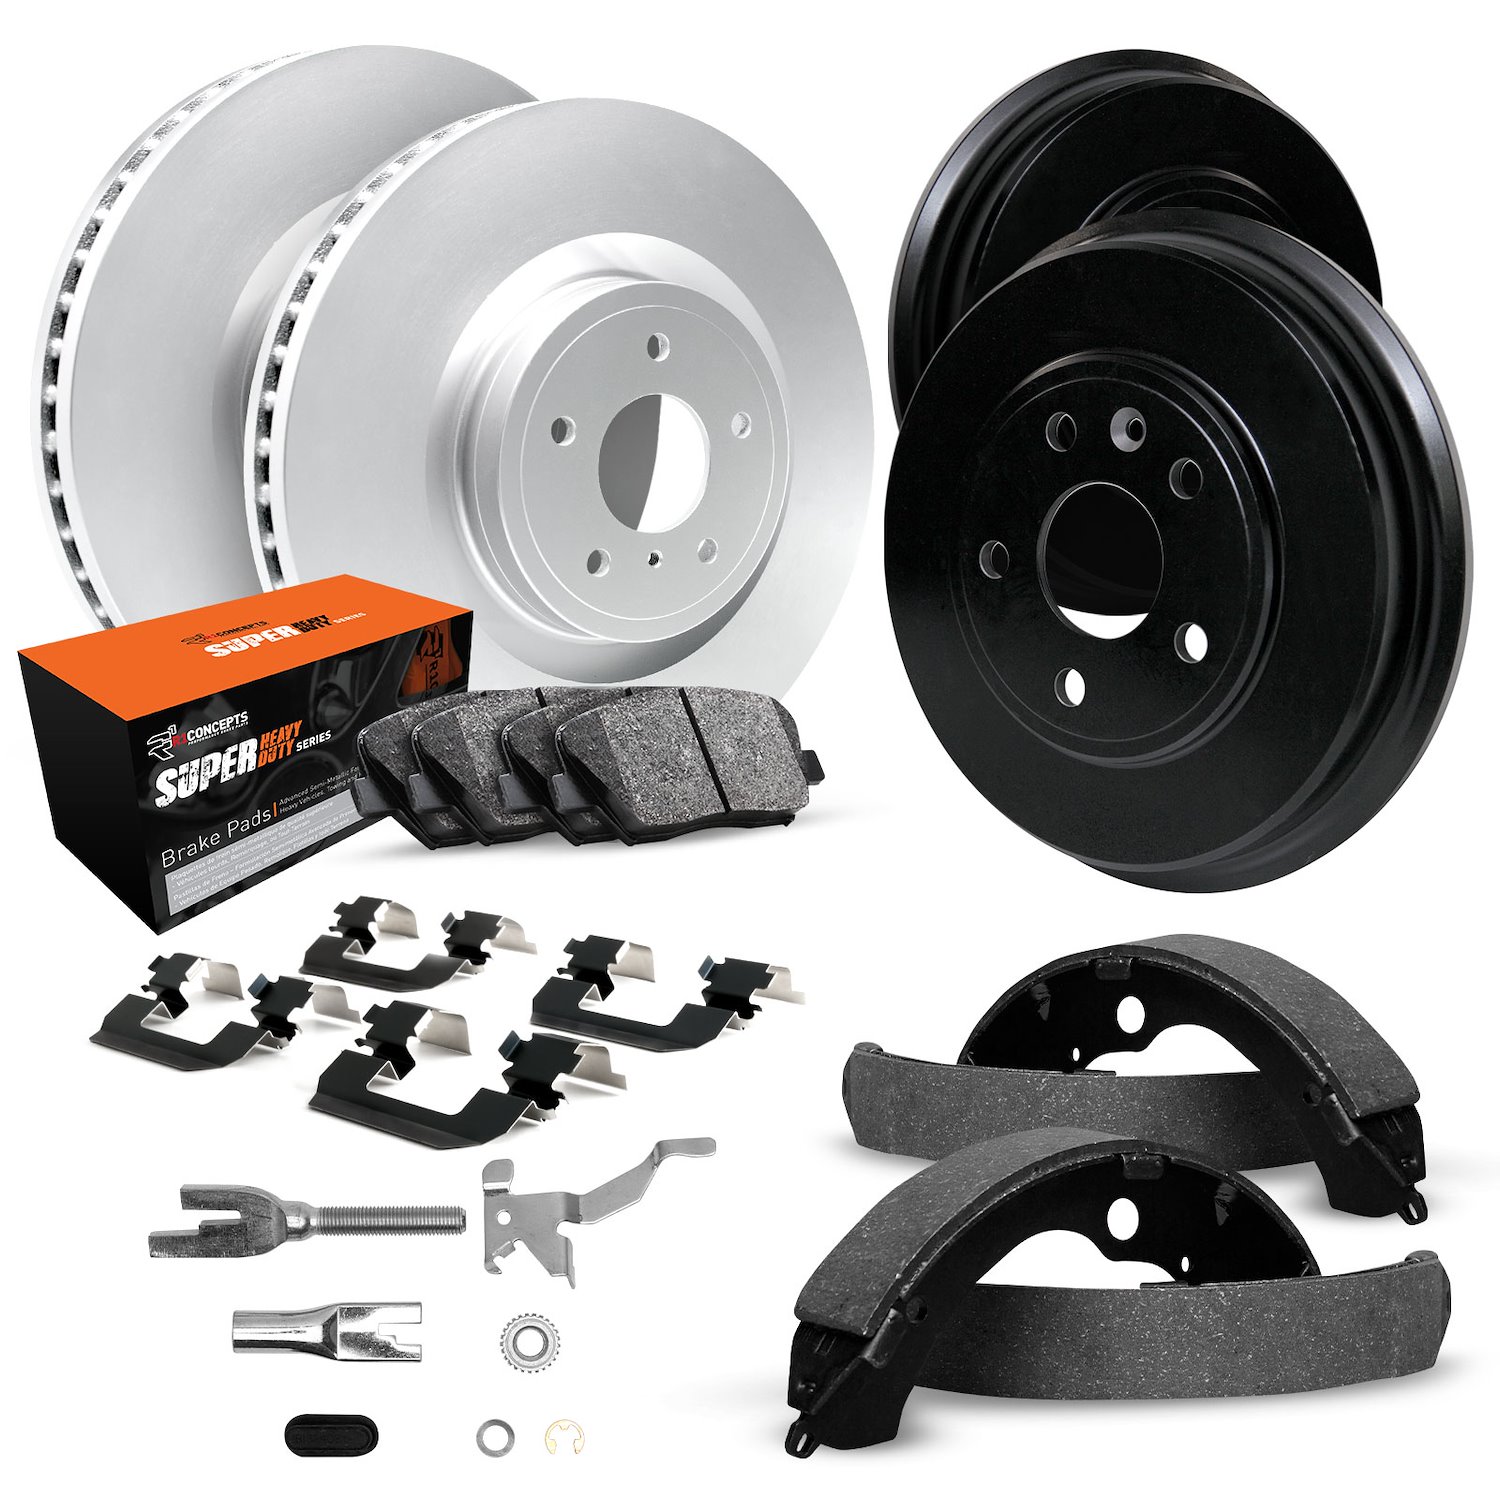 GEO-Carbon Brake Rotor & Drum Set w/Super-Duty Pads, Shoes, Hardware/Adjusters, 1978-1993 GM, Position: Front & Rear